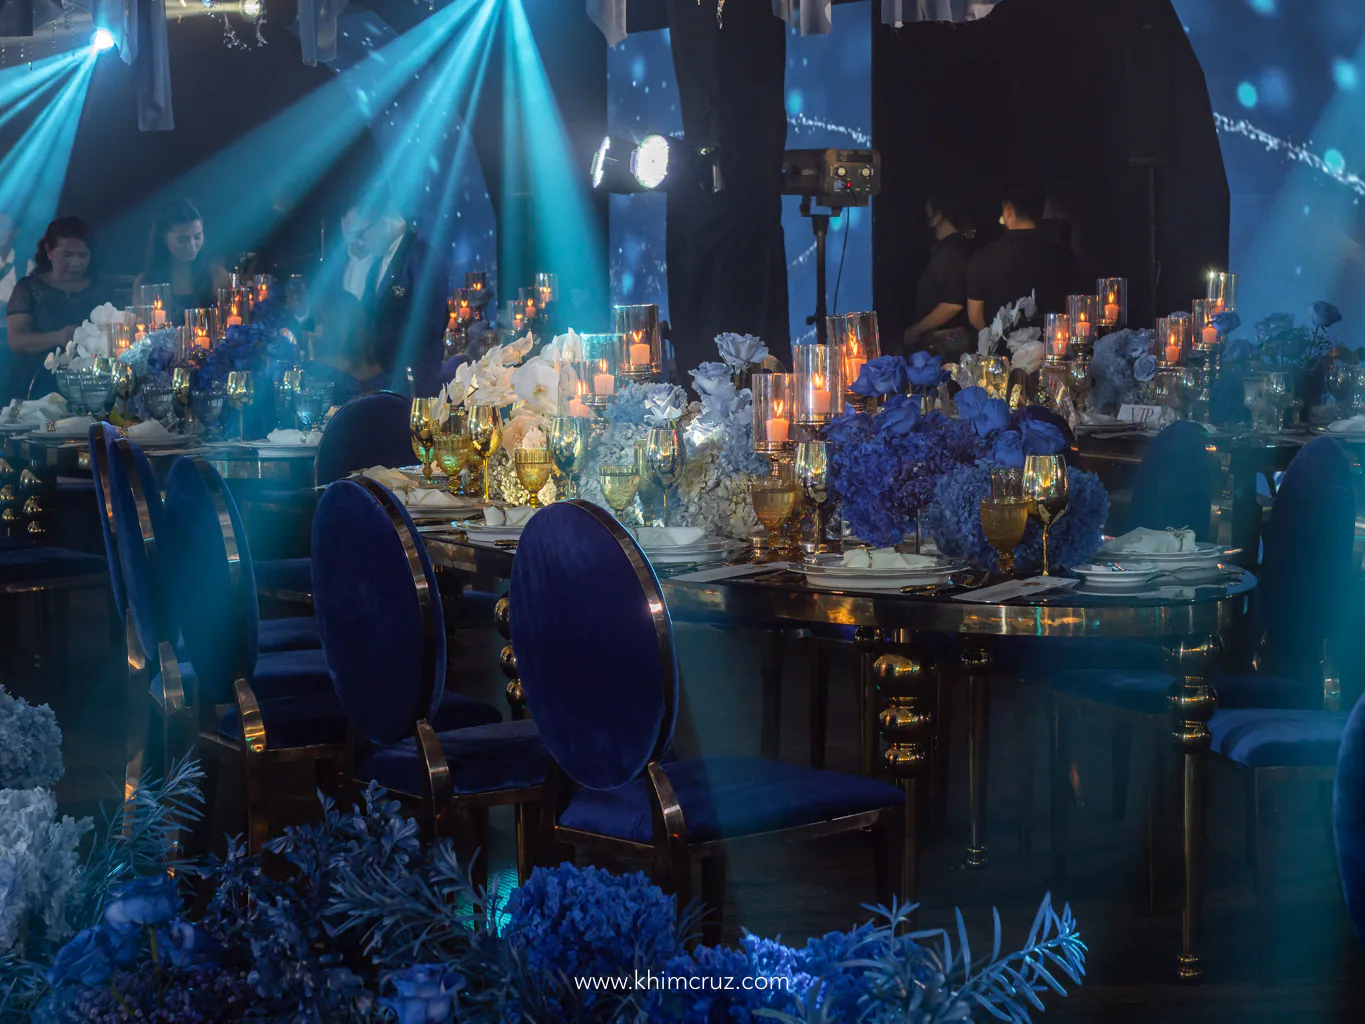 roses and phalaenopsis table centerpieces for a dreamy blue ethereal wedding behind are curved LED walls